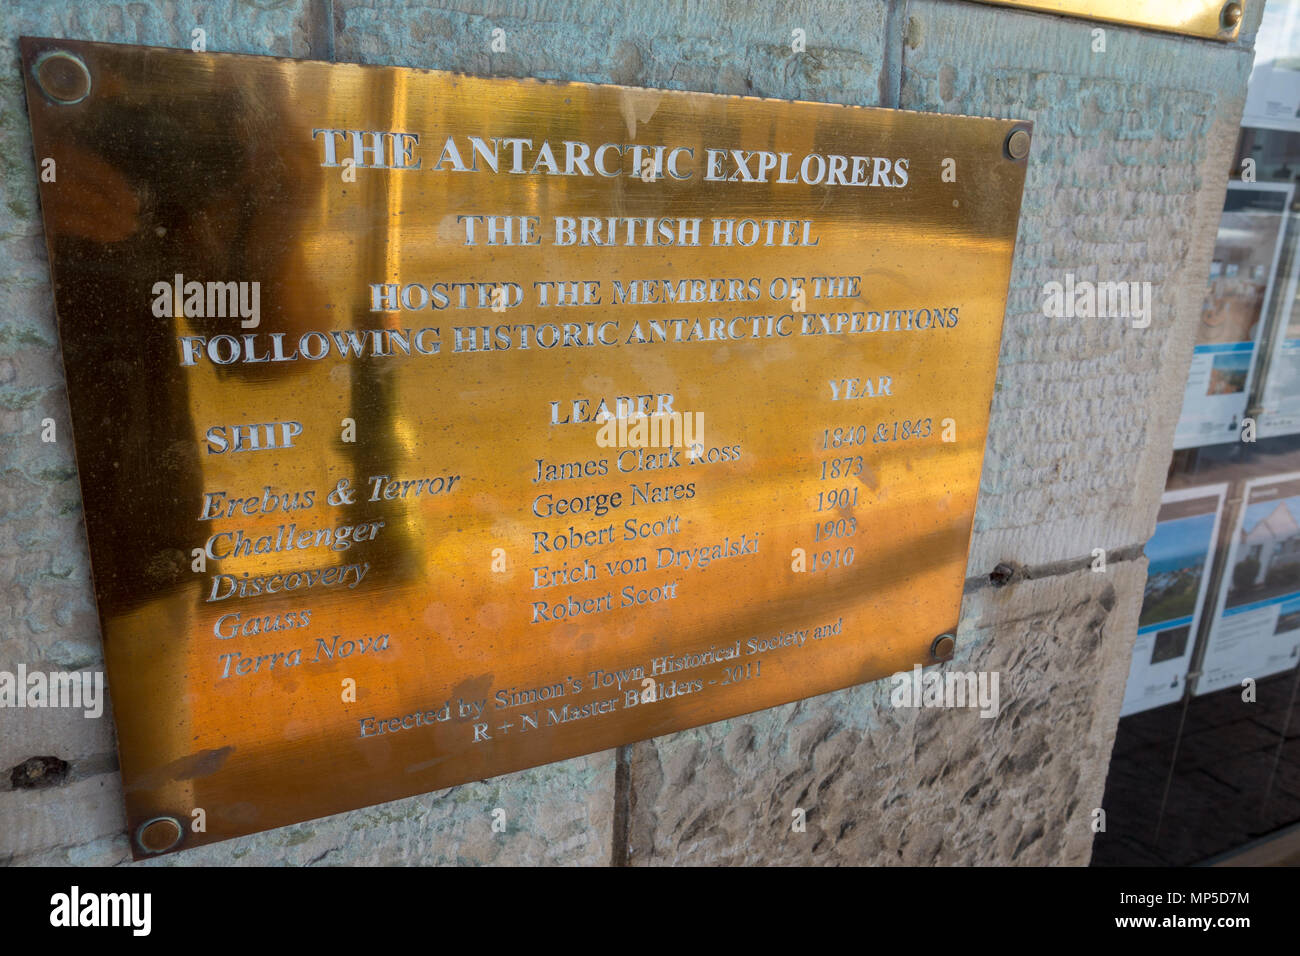 Brass plaque on the wall of The British Hotel in Simon's Town, South Africa, at which many 18th and 19th century Antarctic explorers stayed. Stock Photo